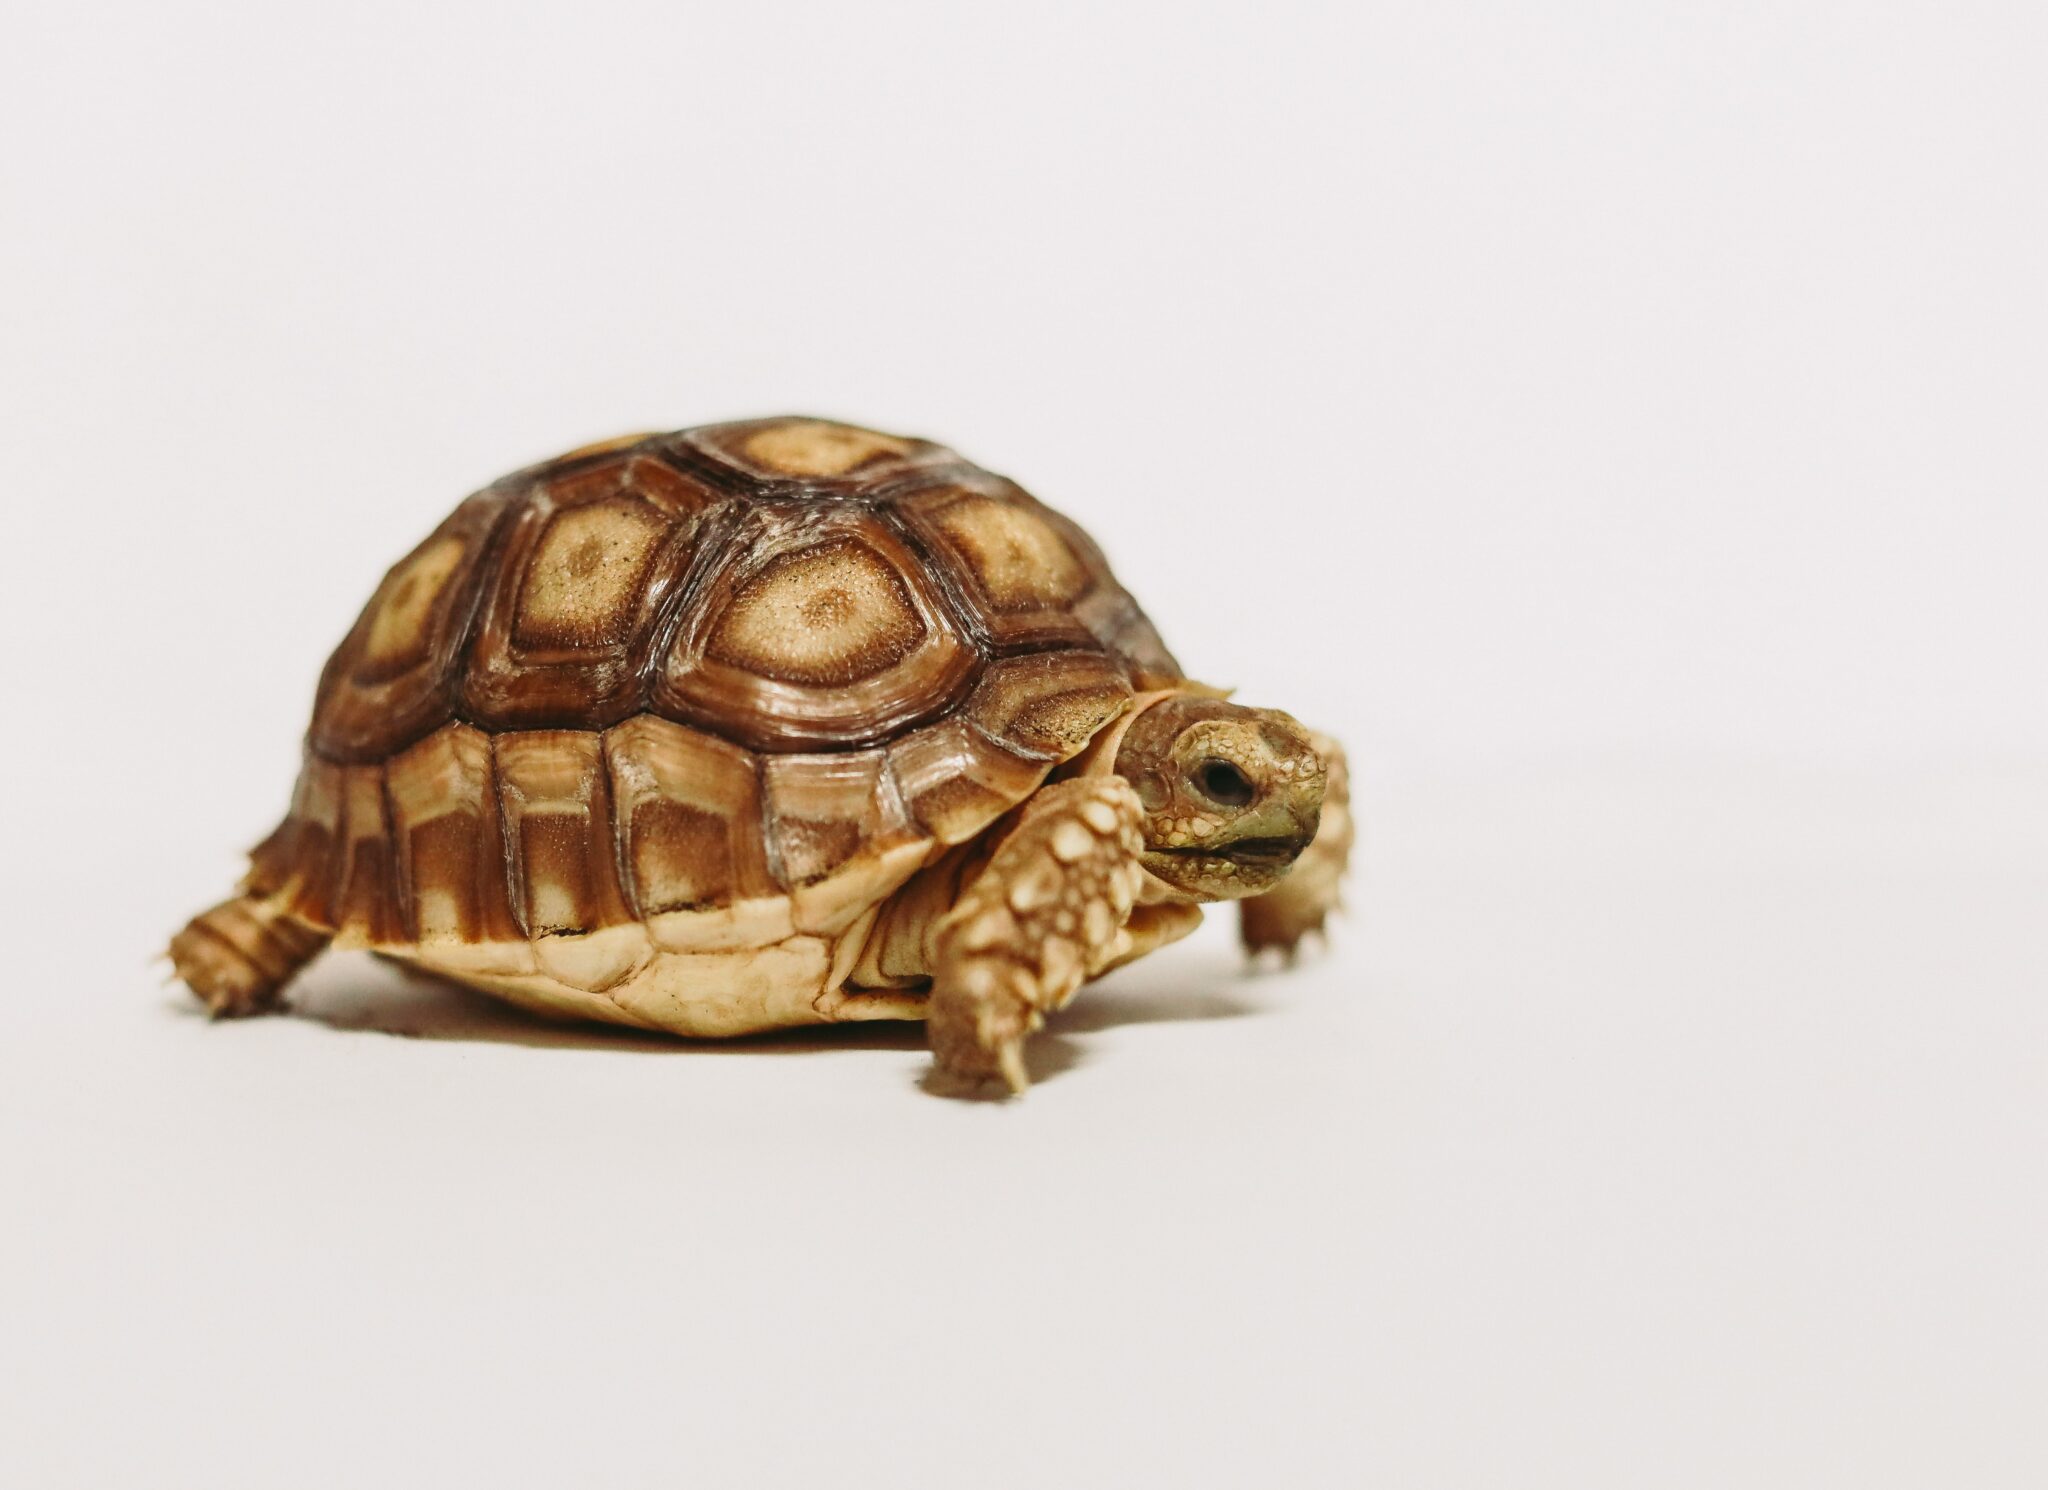 A turtle in front of a white background